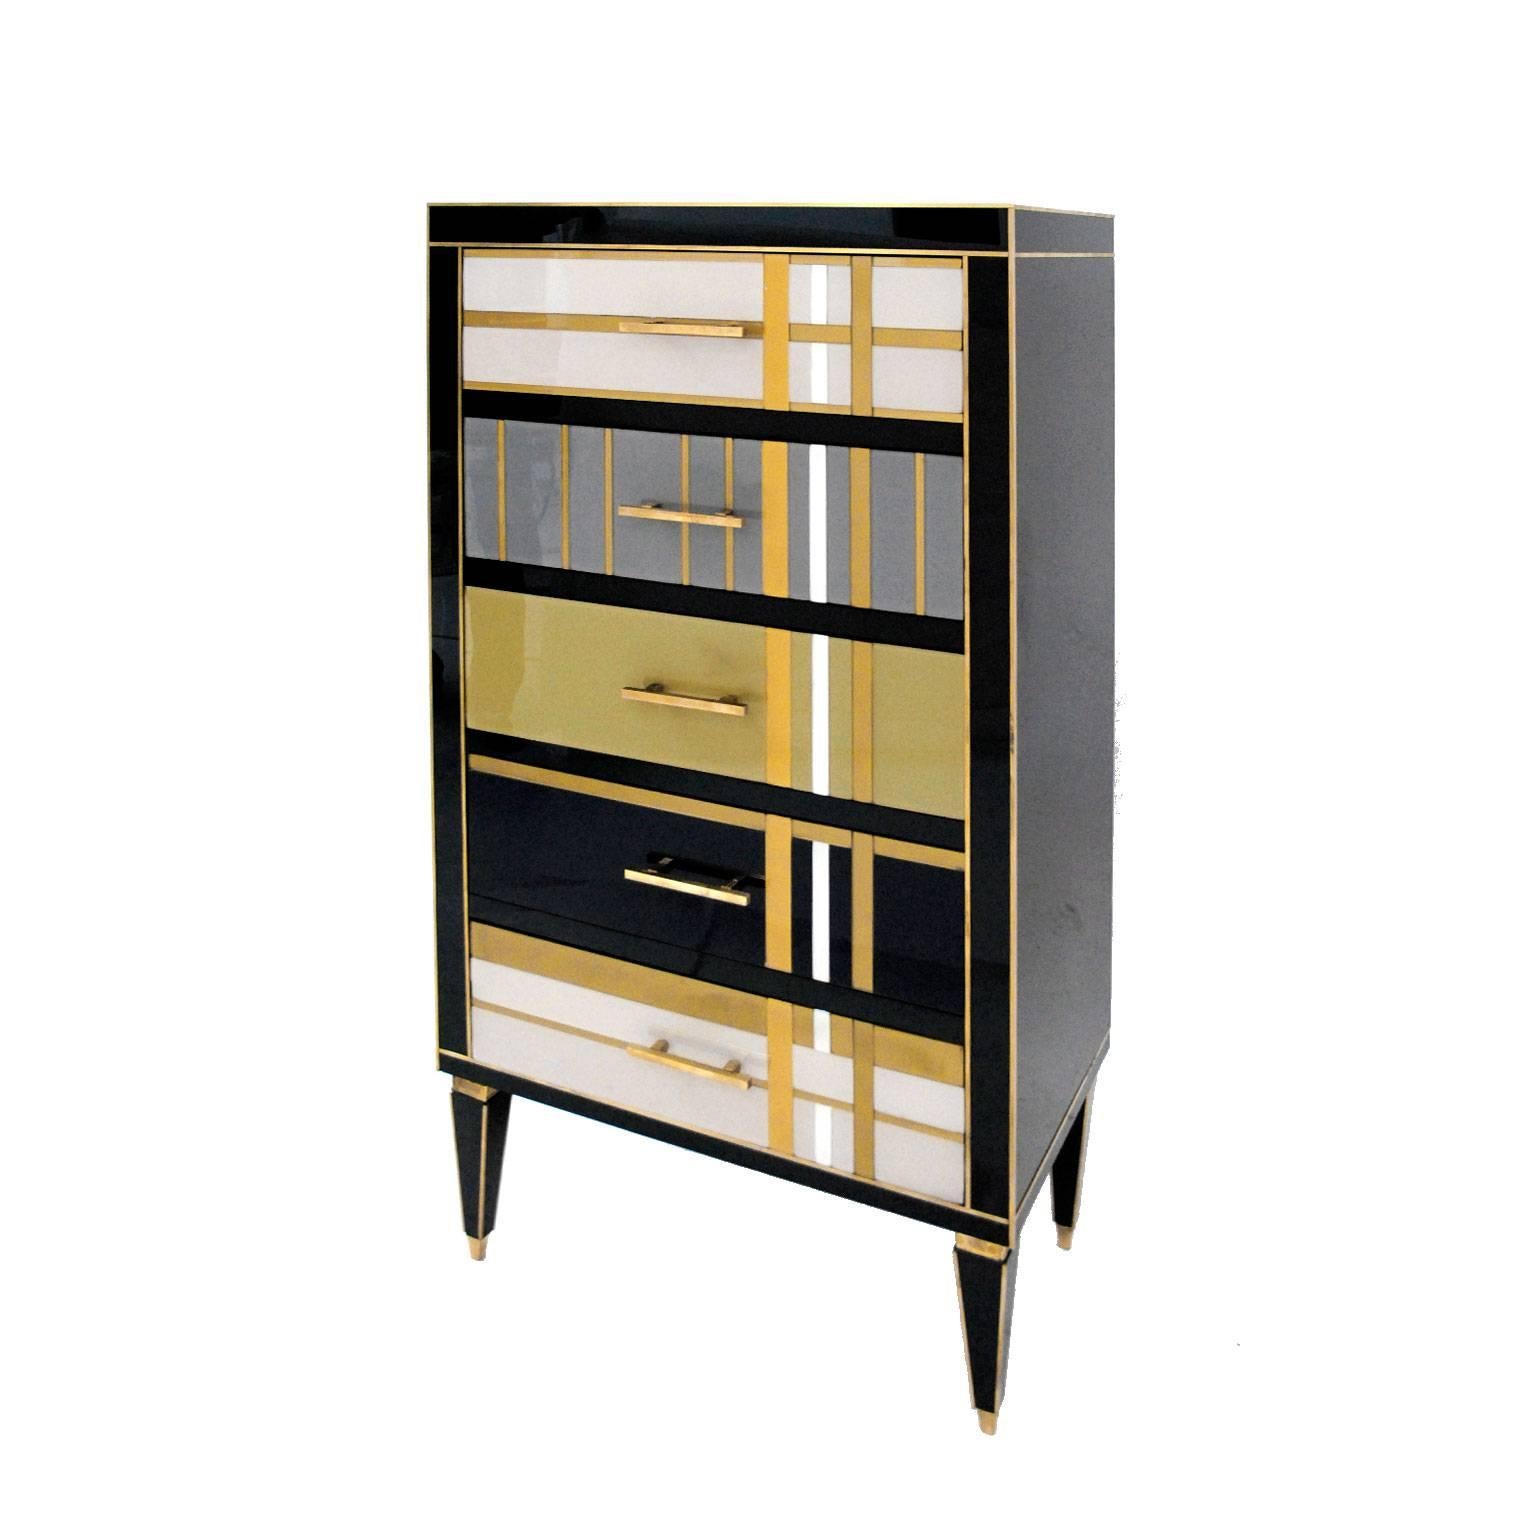 Commode composed by five drawers, made ins olid wood covered in different colors Murano glass, finished in brass.